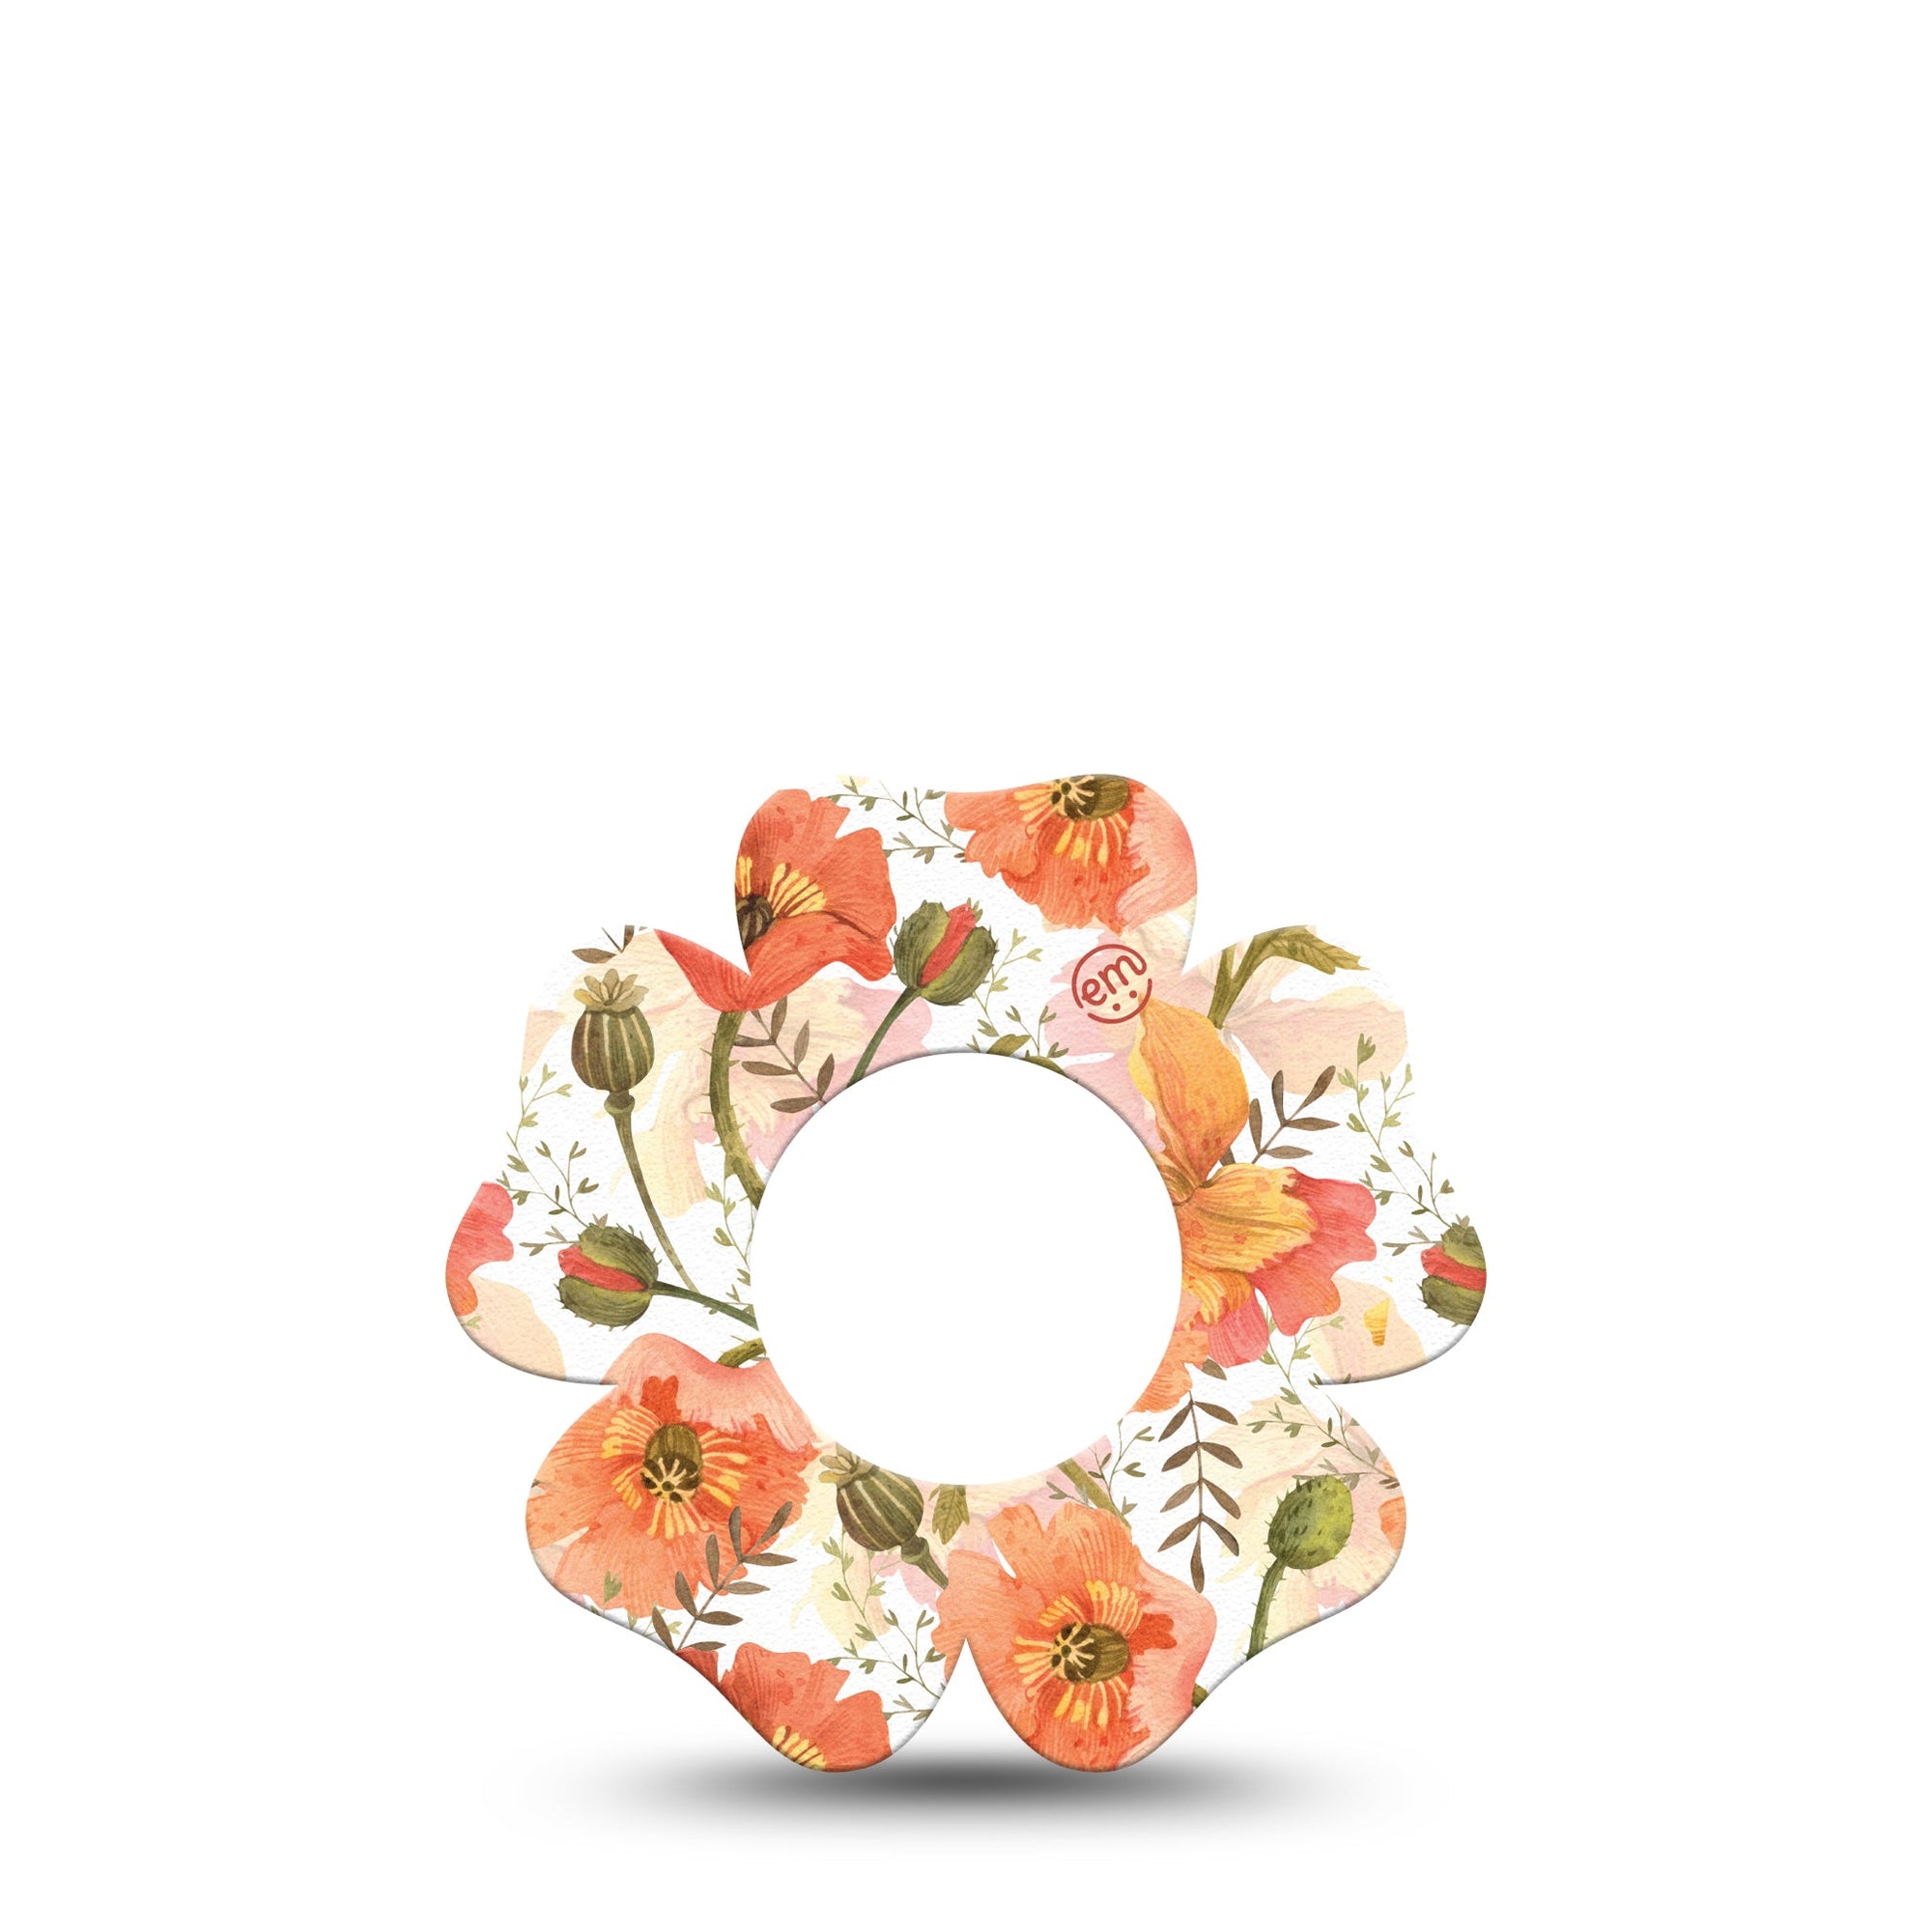 ExpressionMed Peachy Blooms Libre Flower Tape orange fall flower design